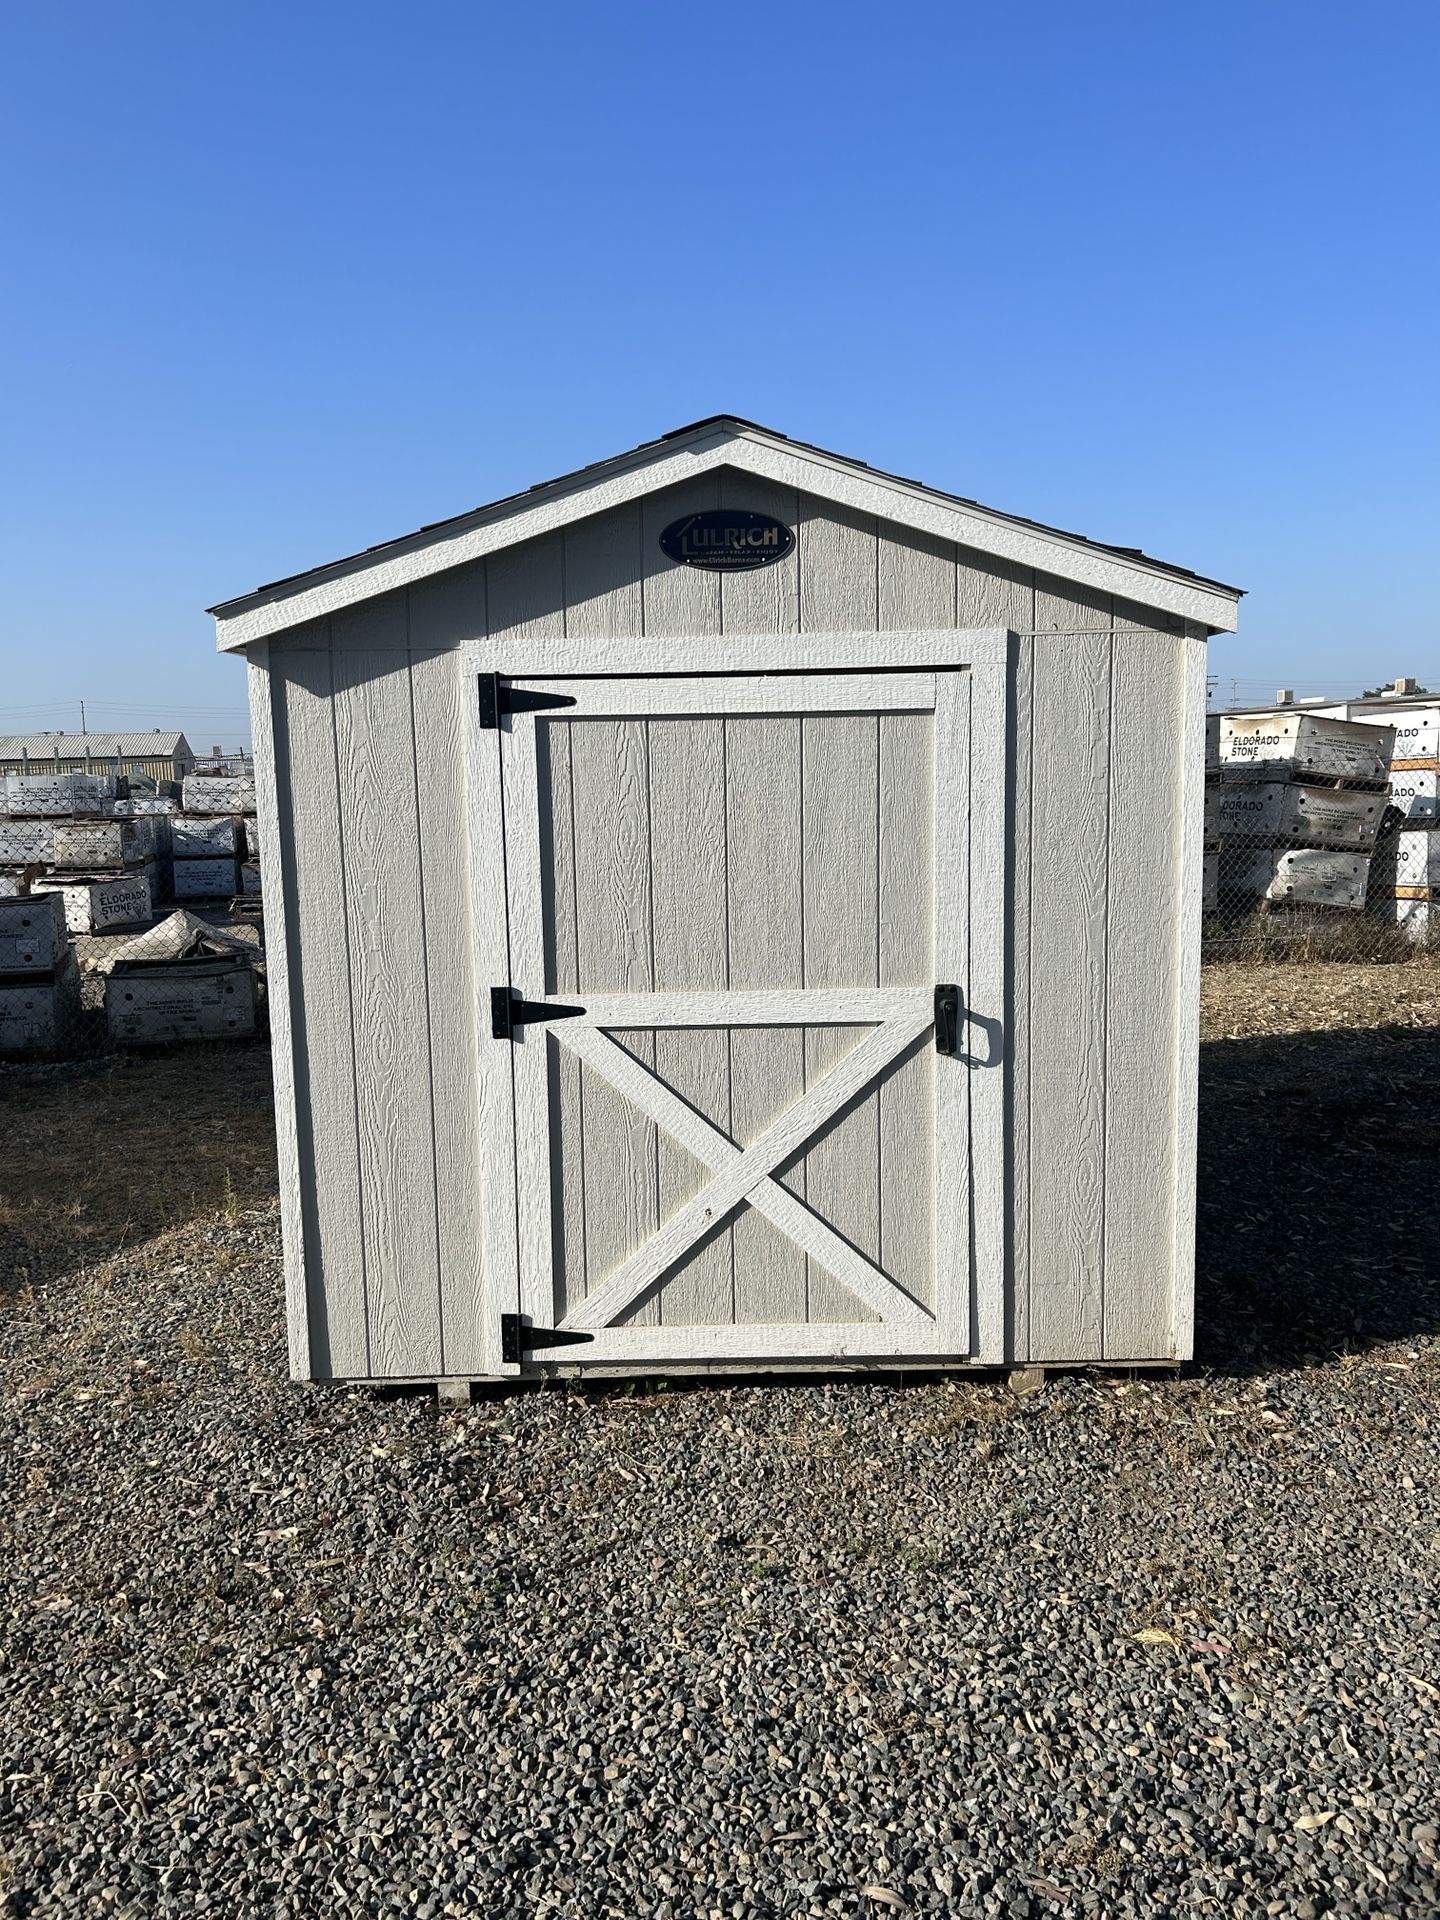 8x10 Shed